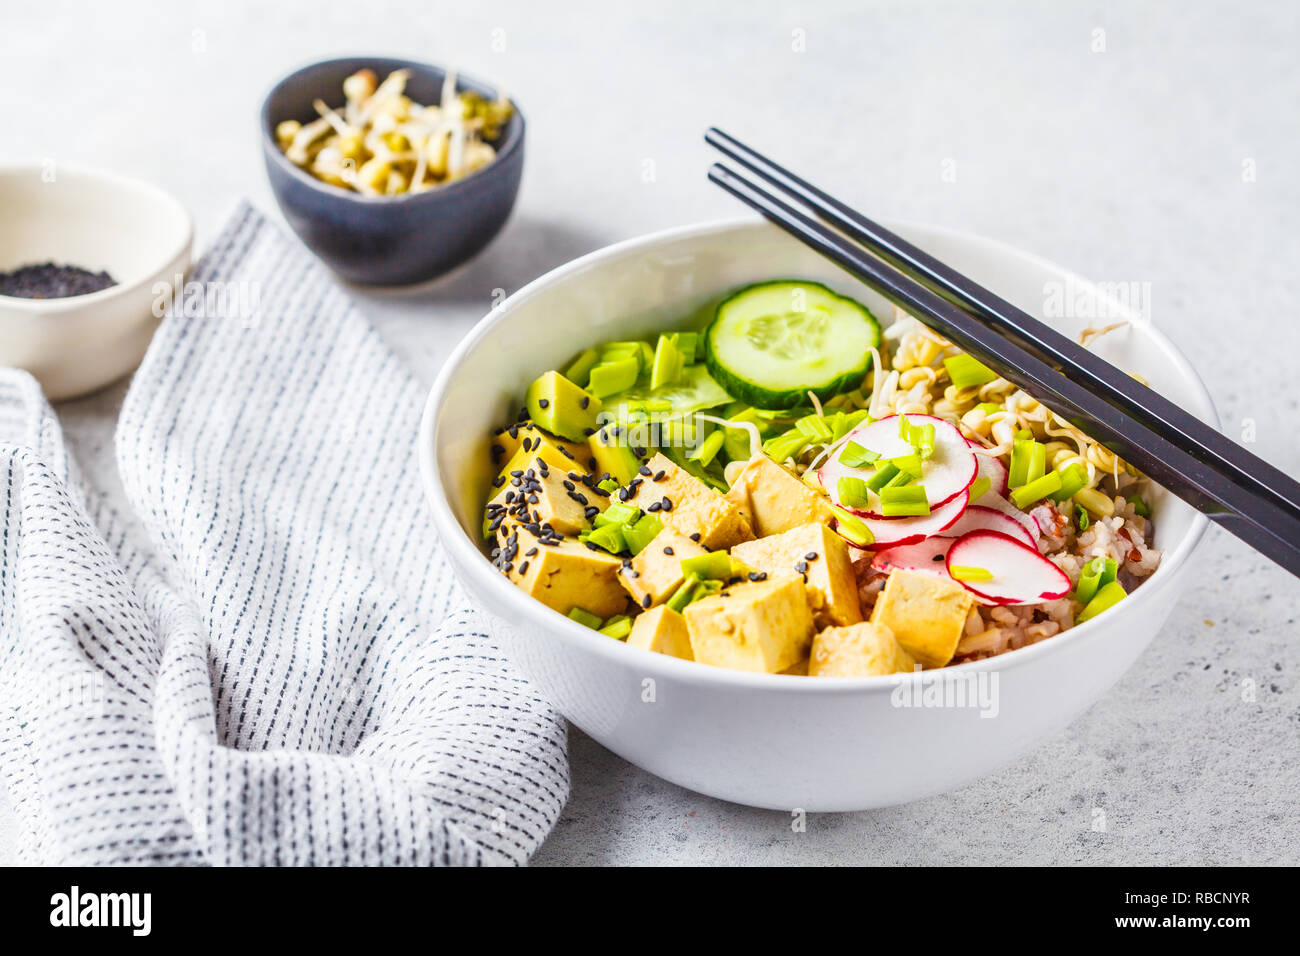 Vegan poke bowl with pickled tofu, vegetables and rice in a white bowl. Plant based diet concept. Stock Photo